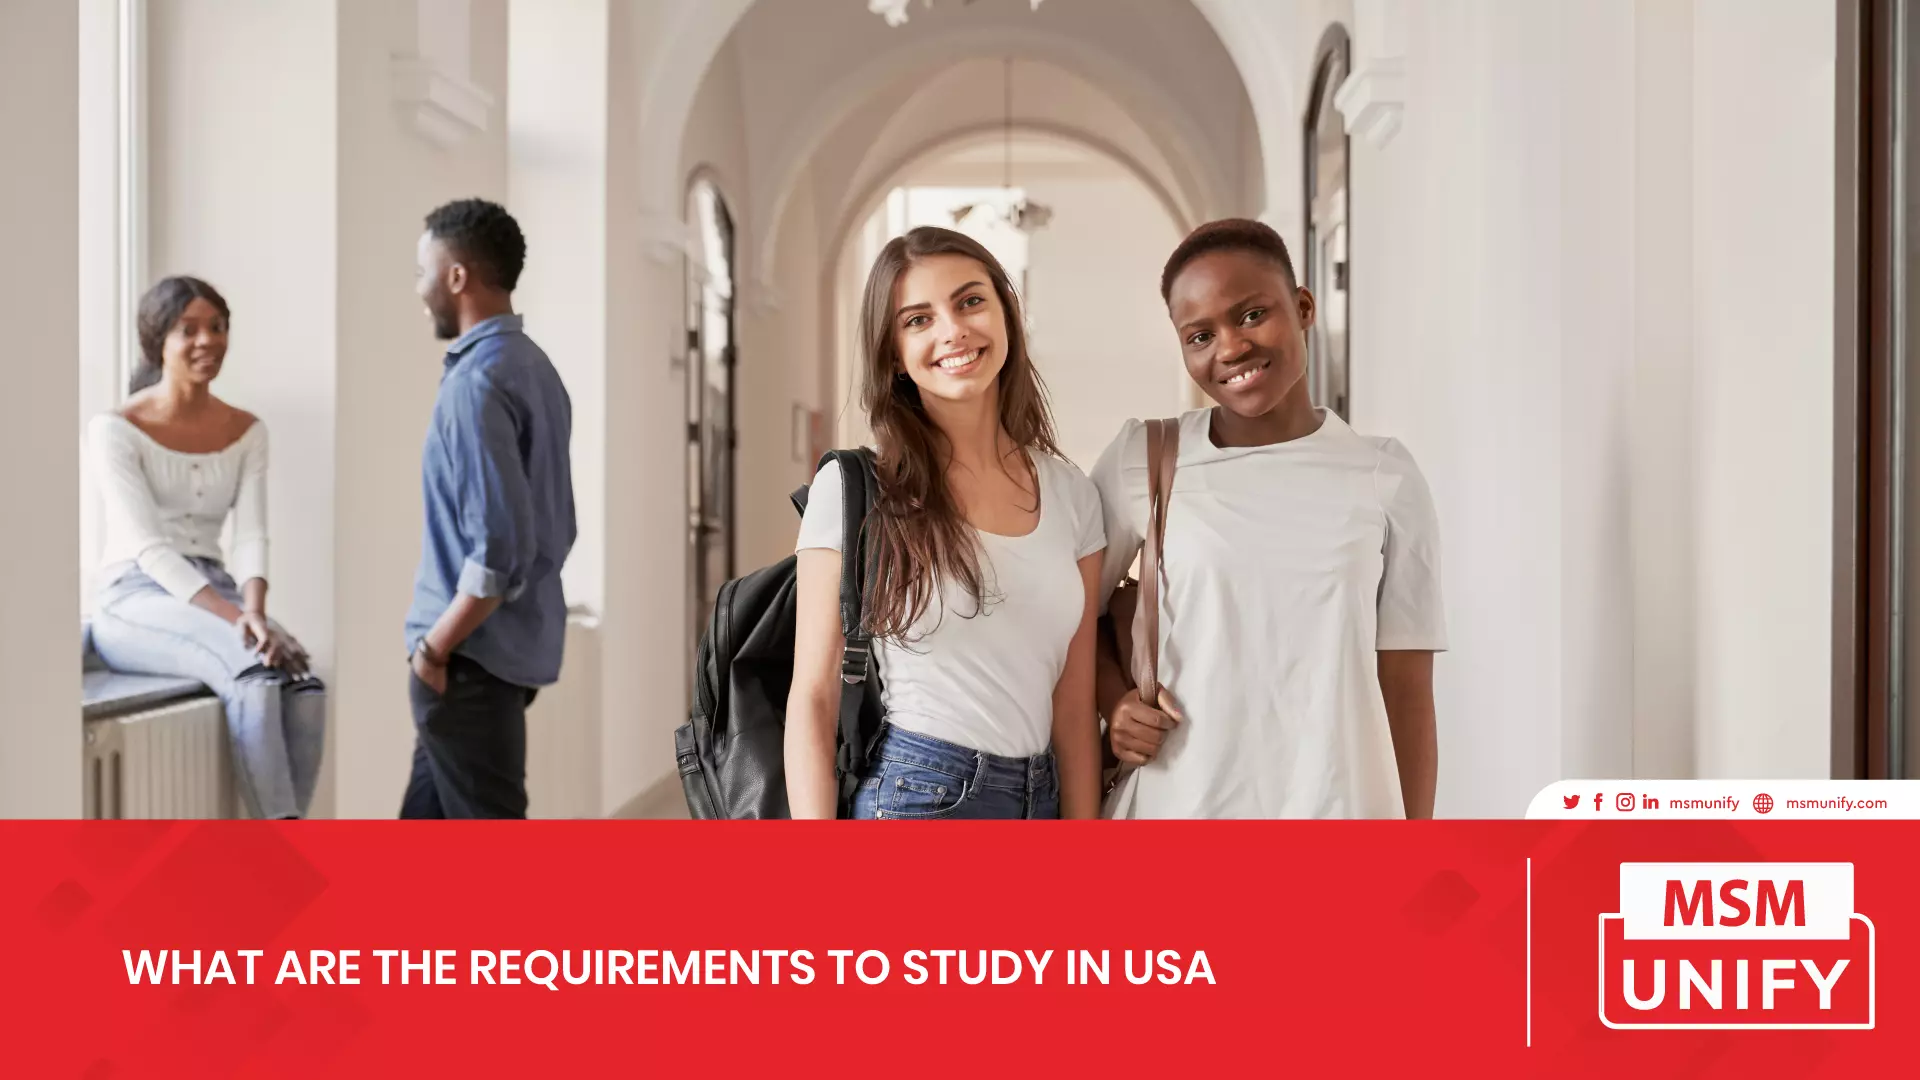 Requirements to Study in USA